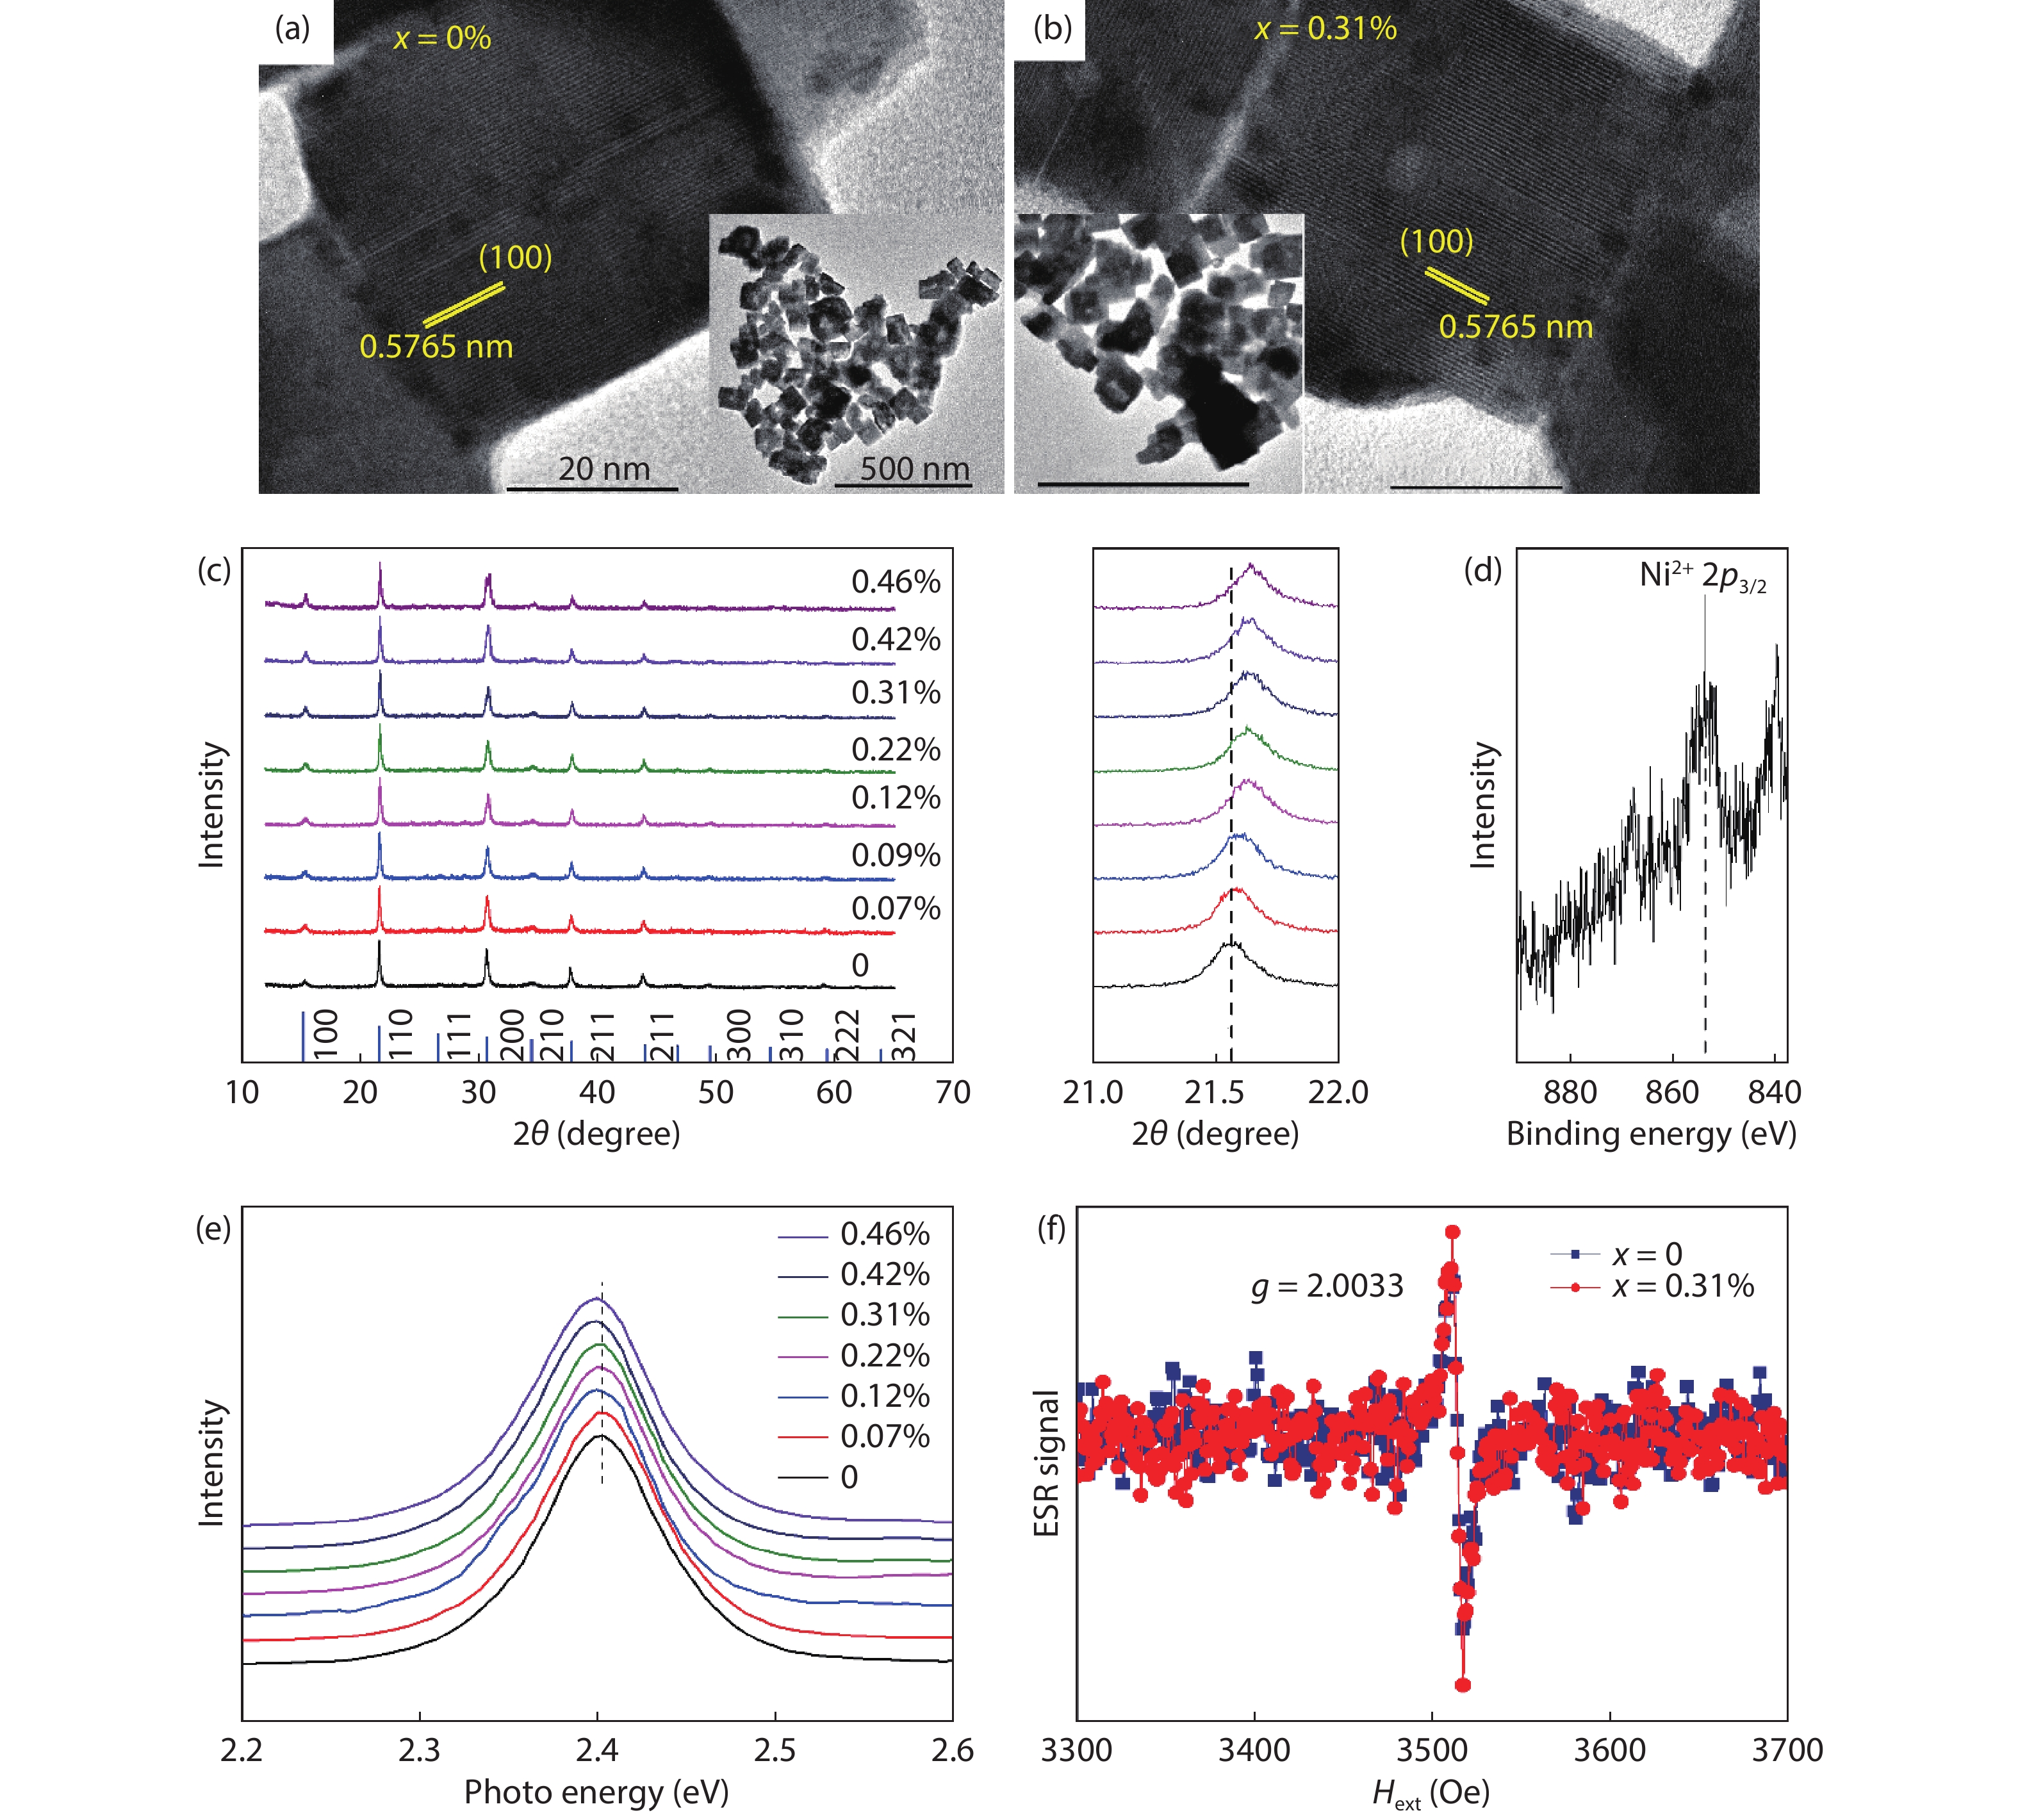 (Color online) Crystal and electronic structure characterizations. High-resolution TEM images of CsPb1–xNixBr3 nanocrystals with (a) x = 0 and (b) x = 0.31%. The insets show corresponding low-resolution TEM images. (c) XRD patterns of CsPb1–xNixBr3 nanocrystals with variant x values. The bottom blue vertical lines index the XRD patterns of CsPbBr3 with a cubic-phase structure (PDF#54-0752). The enlarged view of the XRD spectra near 2θ = 21.5º is also shown. (d) X-ray photoelectron spectroscopy of the Ni 2p level in CsPb1–xNixBr3 with x = 0.31%. (e) Photoluminescence spectra of RT-synthesized CsPb1–xNixBr3 nanocrystals with different x, measured at 300 K. (f) The ESR spectra of CsPb1–xNixBr3 nanocrystals with x = 0 and 0.31%, measured at 300 K. 1 Oe = 0.1 mT. All samples used here were RT-synthesized.